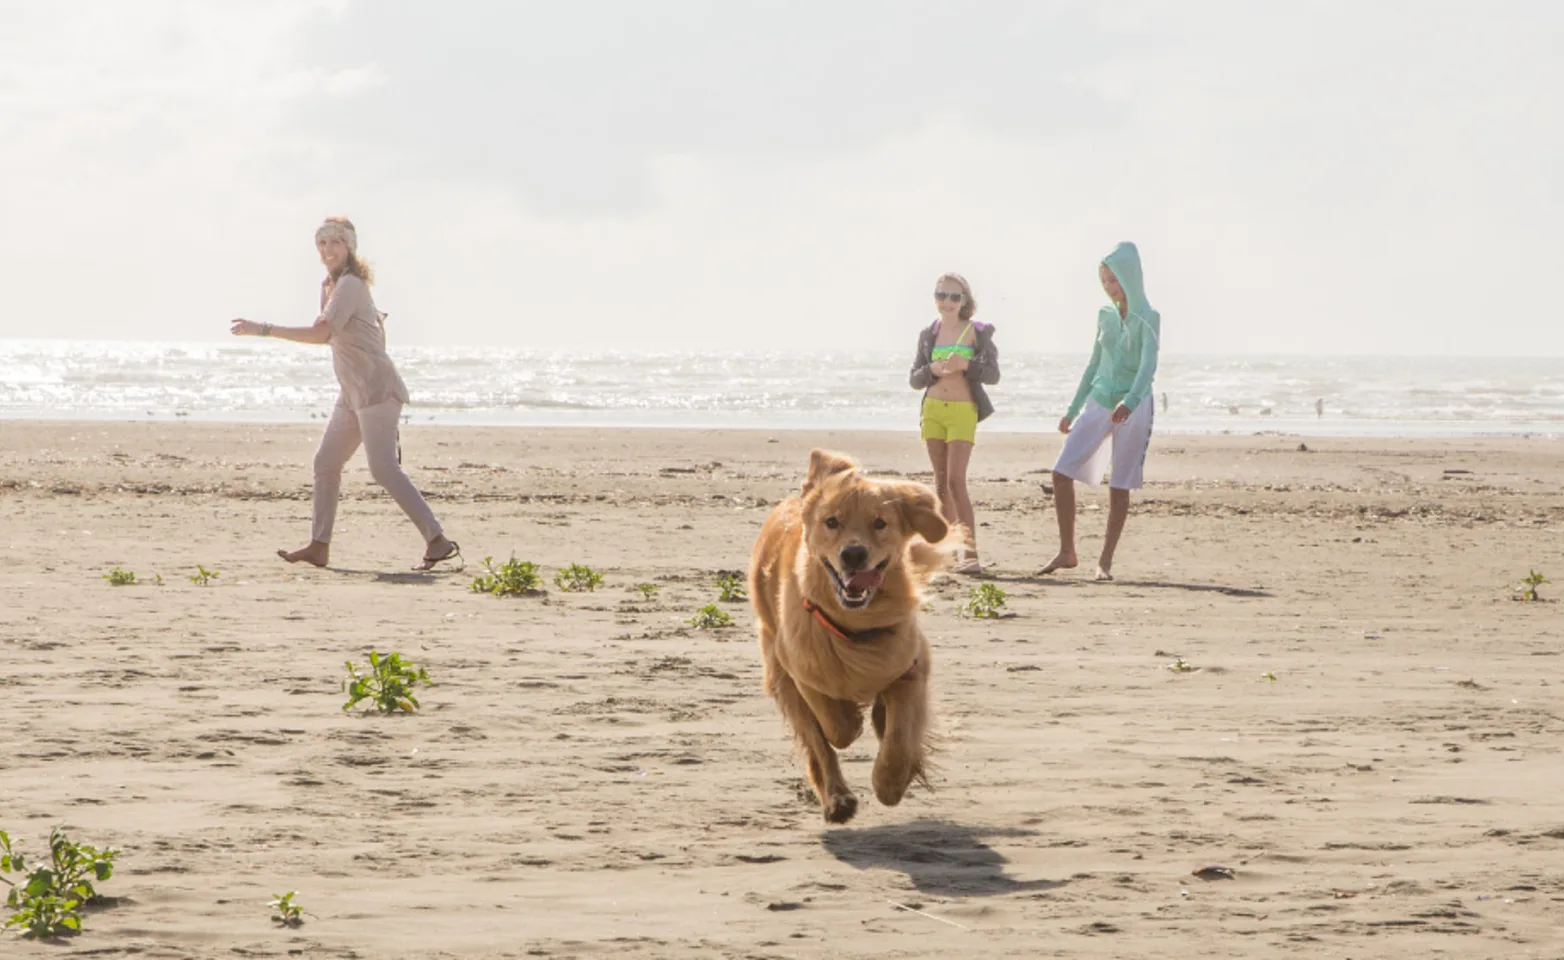 Golden retriever playing with people at the beach